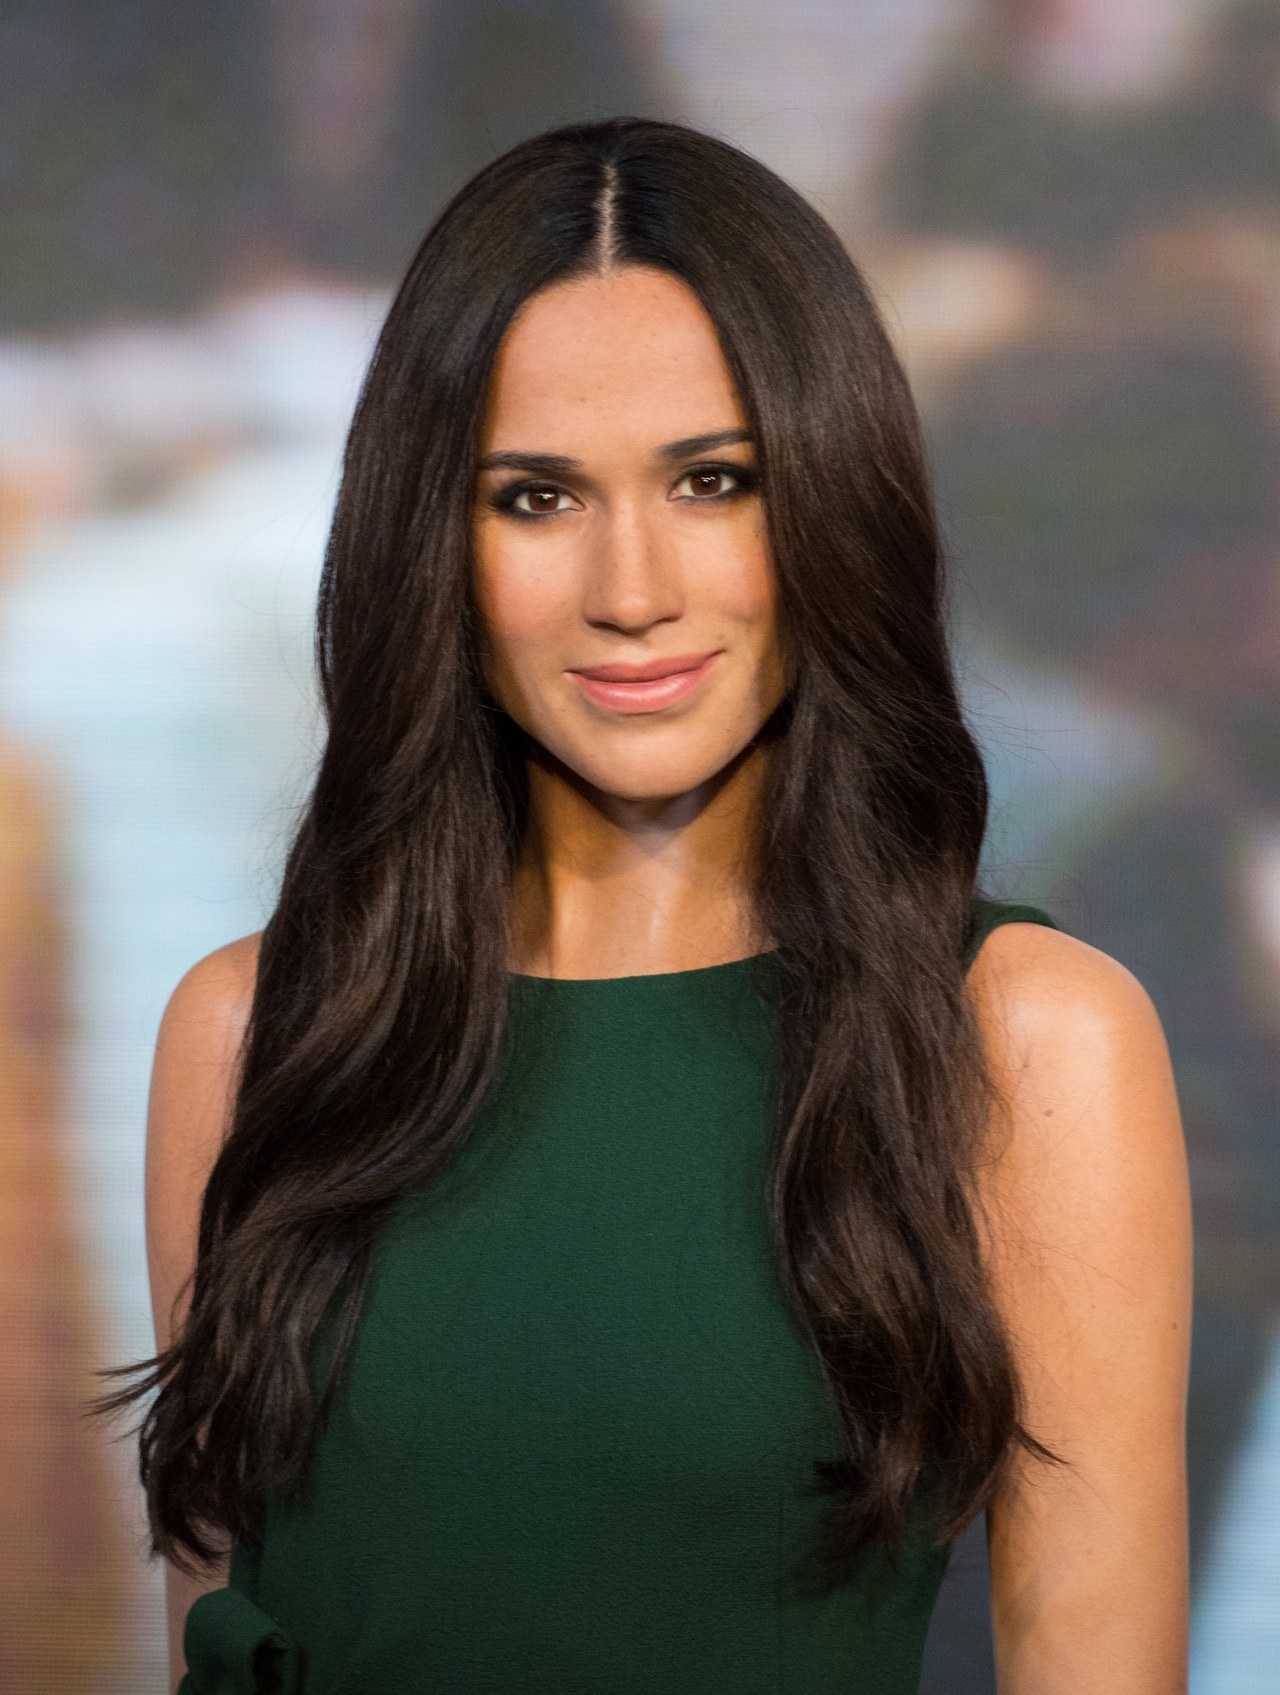 70+ Hot Pictures Of Meghan Markle Which Are Just Too Hot To Handle 9